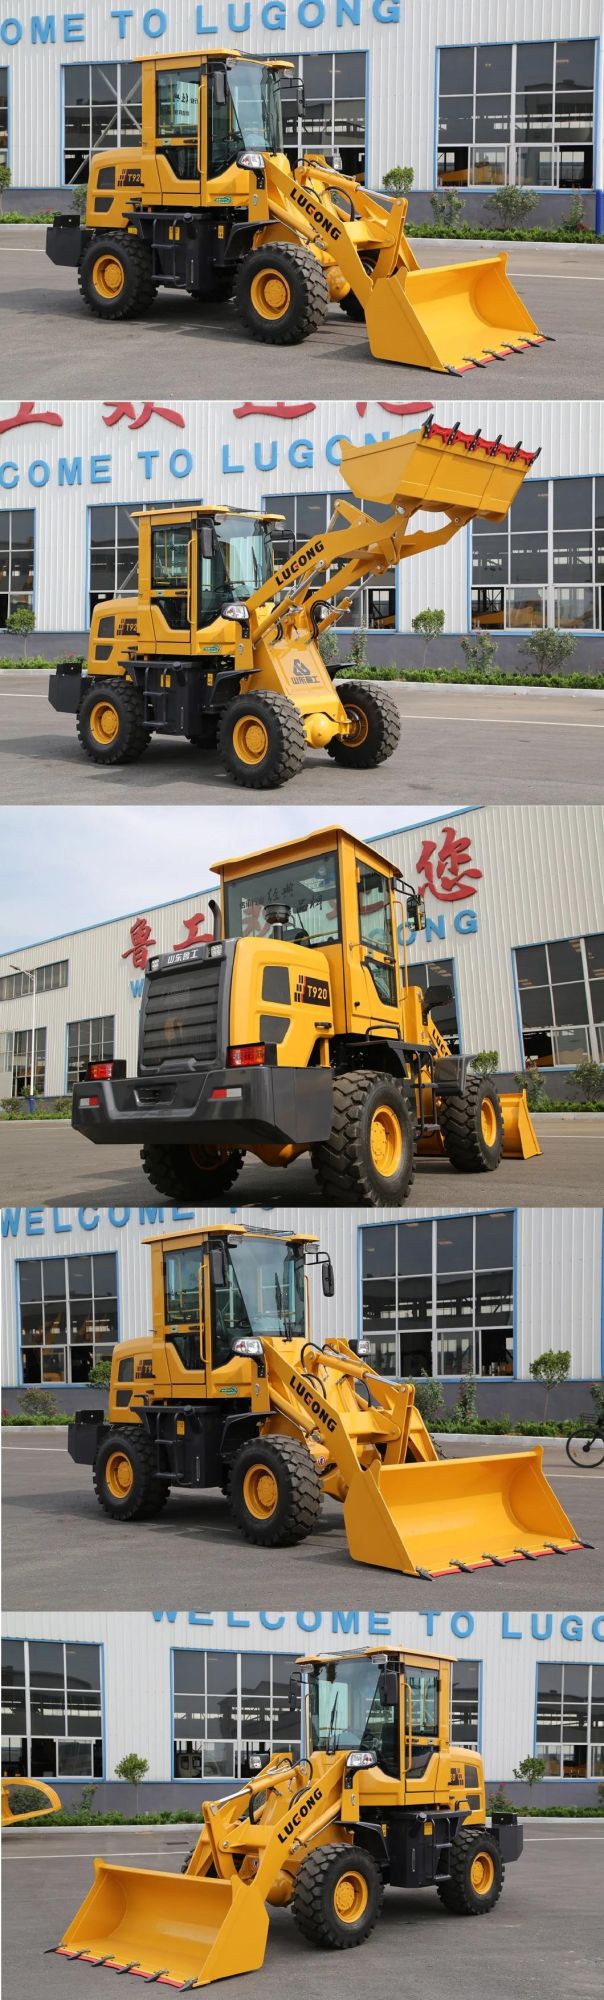 Lugong Compact Wheel Loader and Backhoe for Garden Work